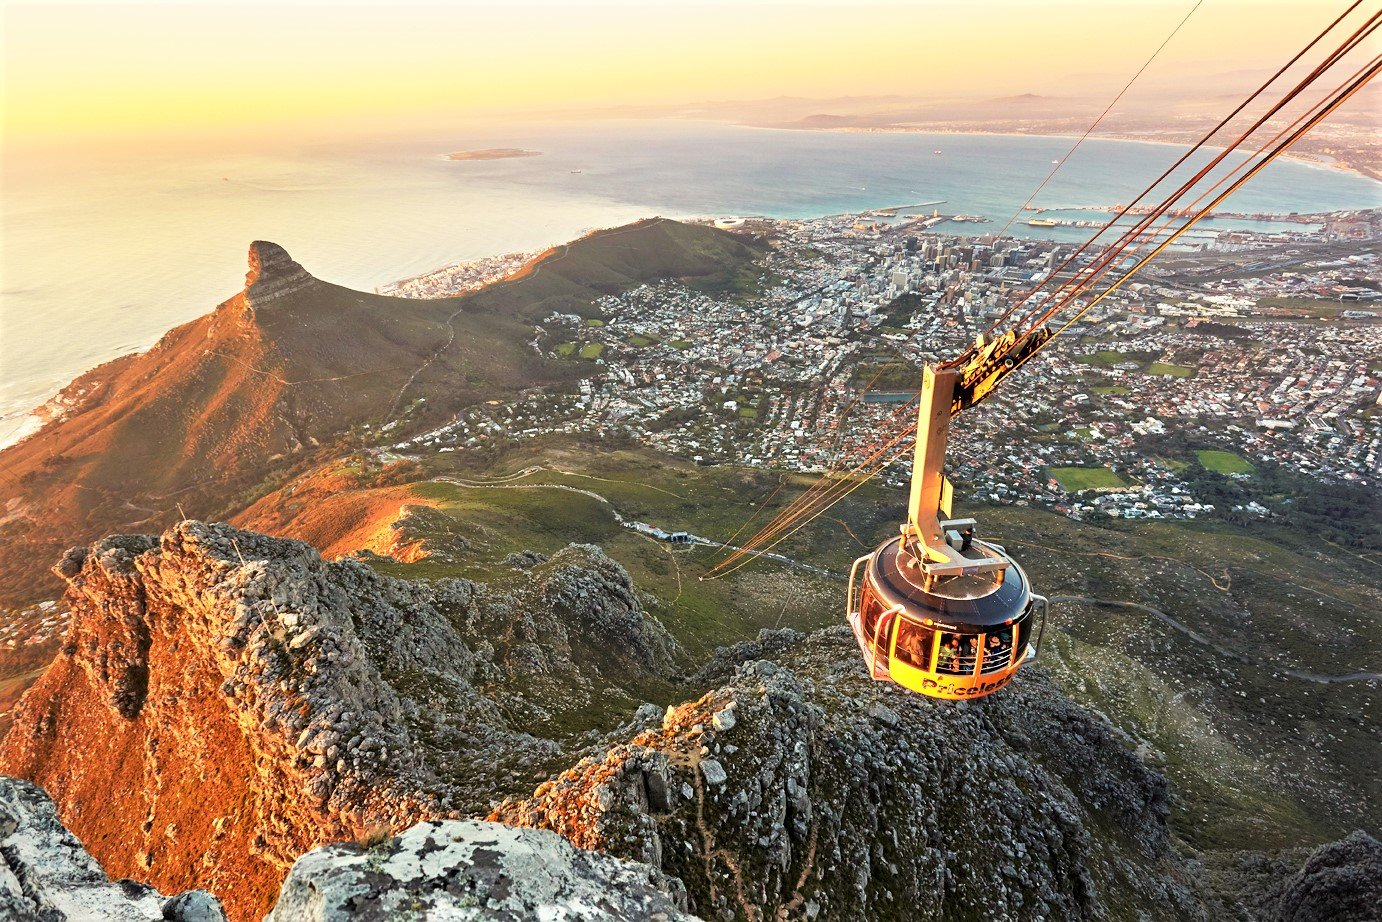 How to reach the highest mountain by cable railway in Cape Town